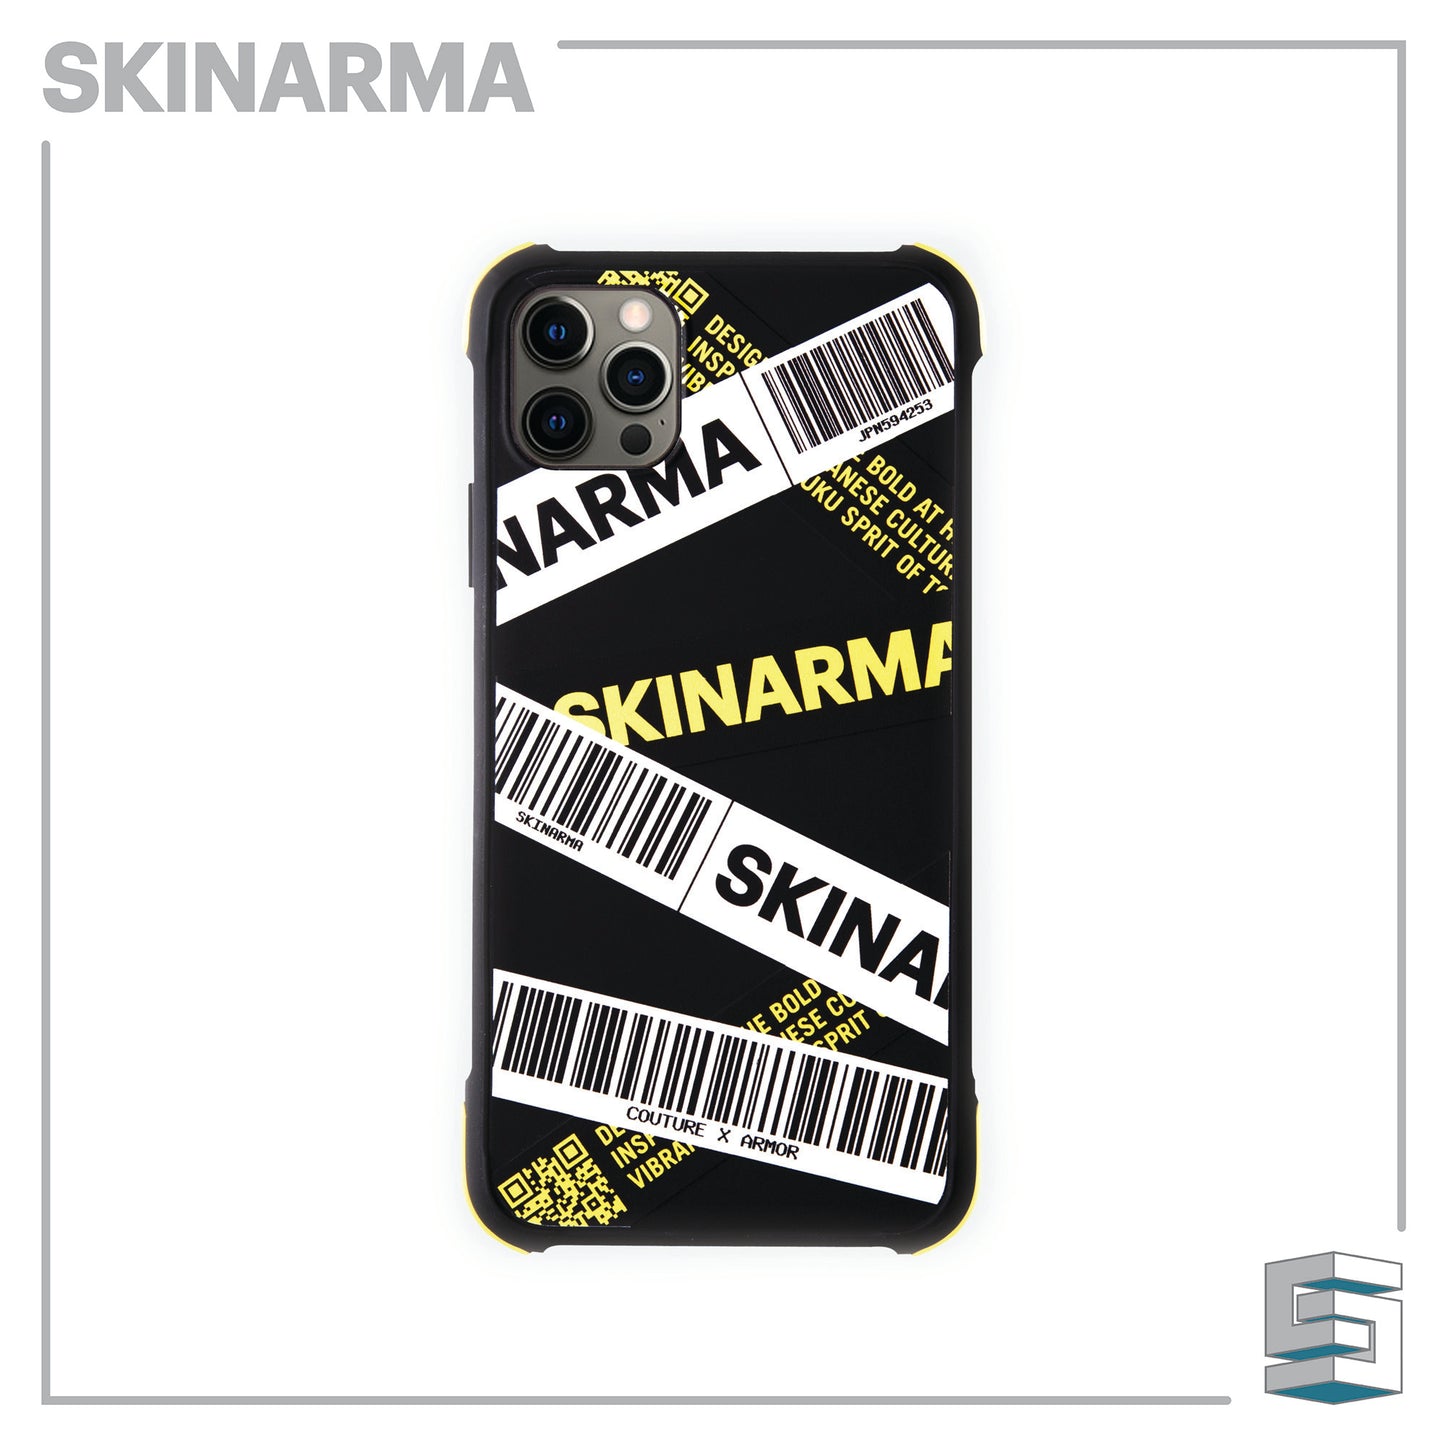 Case for iPhone 12 series - SKINARMA Kakudo (antimicrobial) Global Synergy Concepts